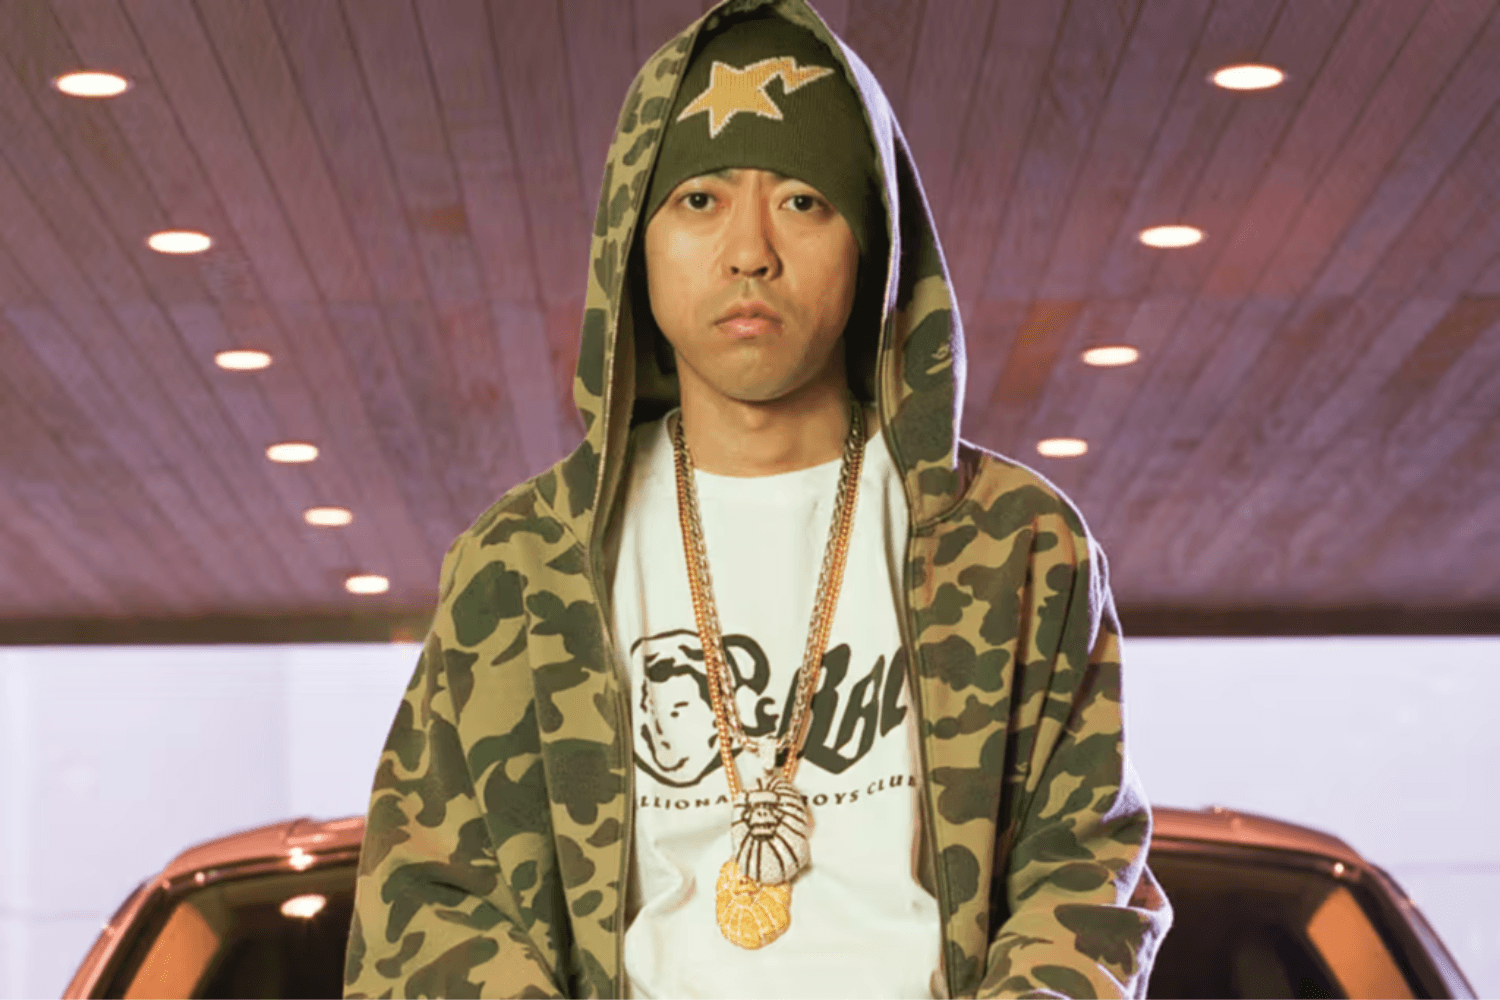 BAPE-founder Nigo joins forces with Nike